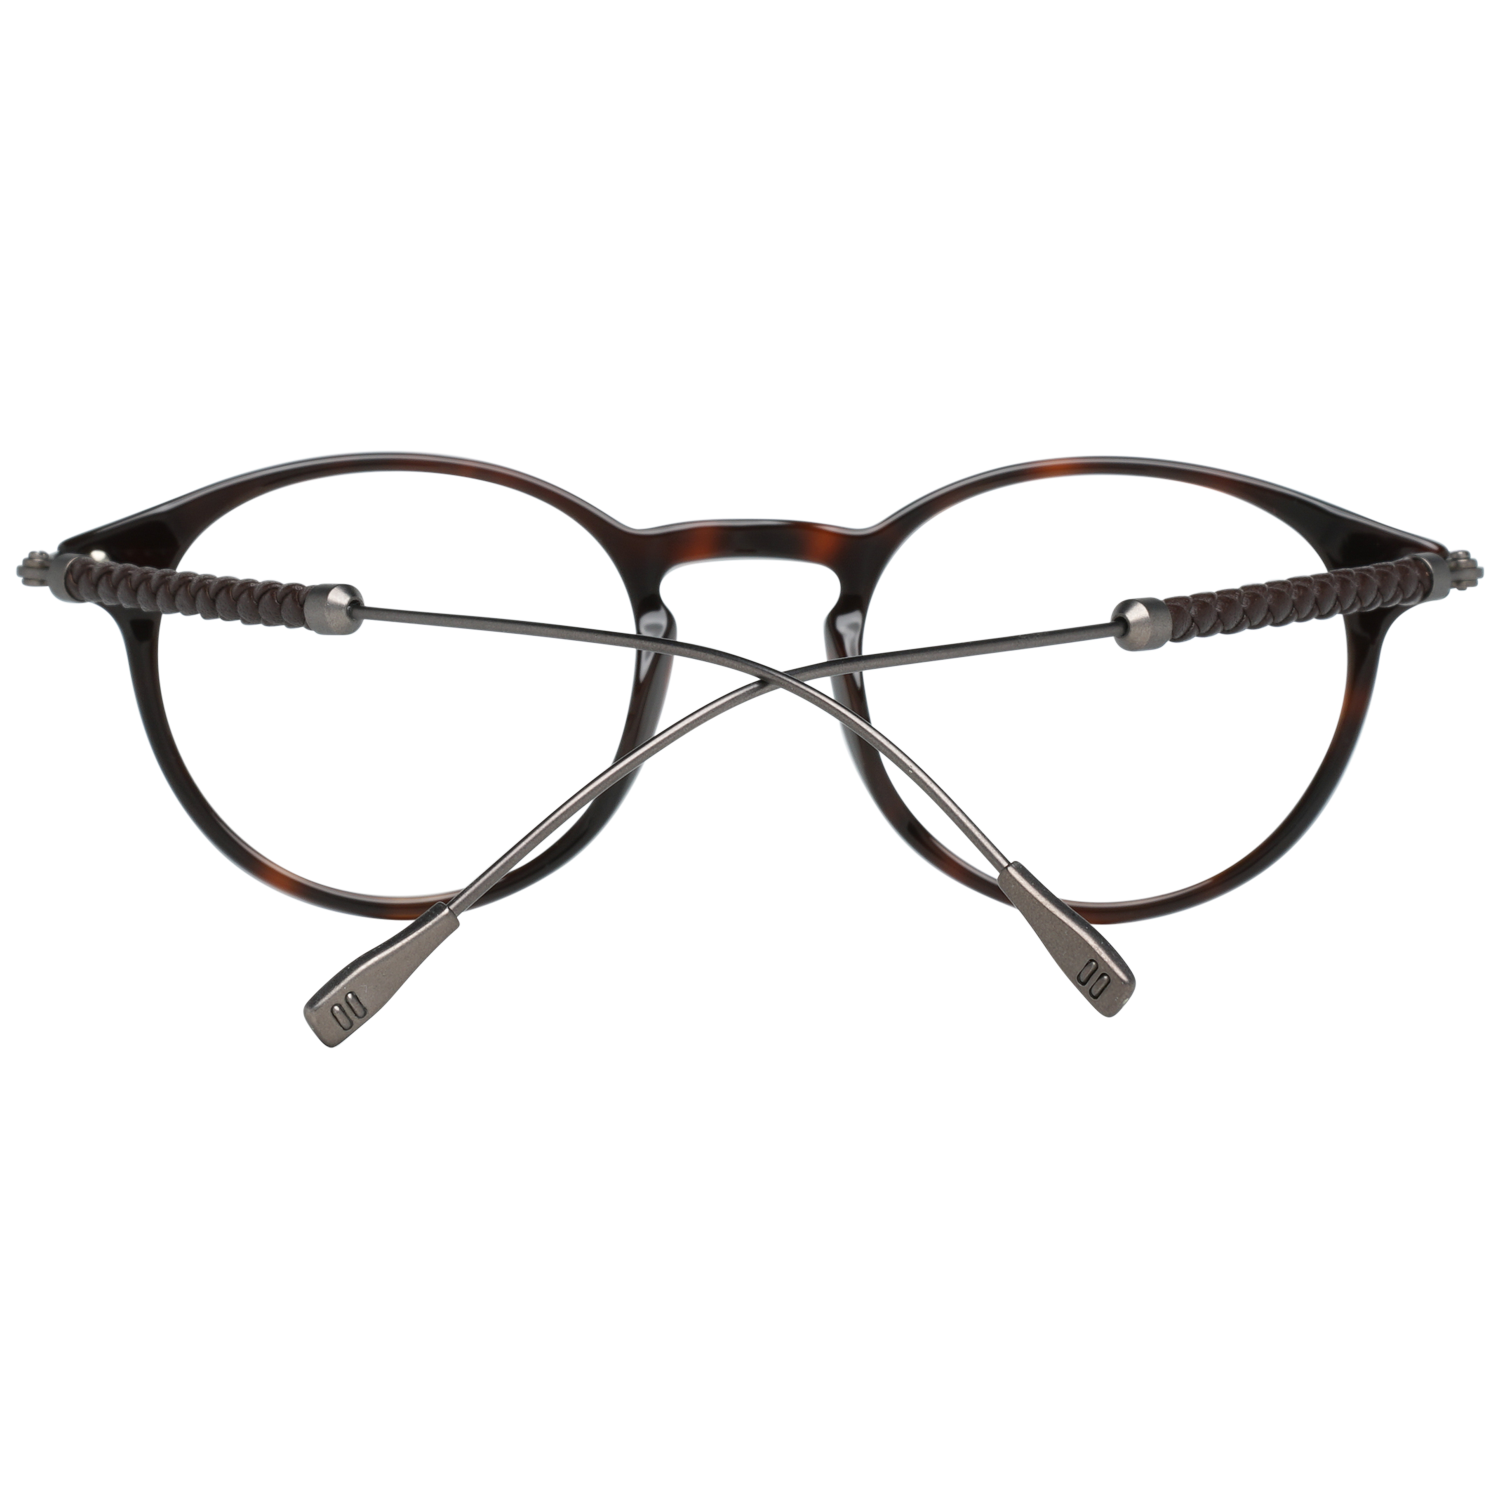 Tods Optical Frame TO5170 054 49 Women Men
Frame color: Brown
Size: 49-21-145
Lenses width: 49
Lenses heigth: 44
Bridge length: 21
Frame width: 145
Temple length: 145
Shipment includes: Case, Cleaning cloth
Style: Full-Rim
Spring hinge: No